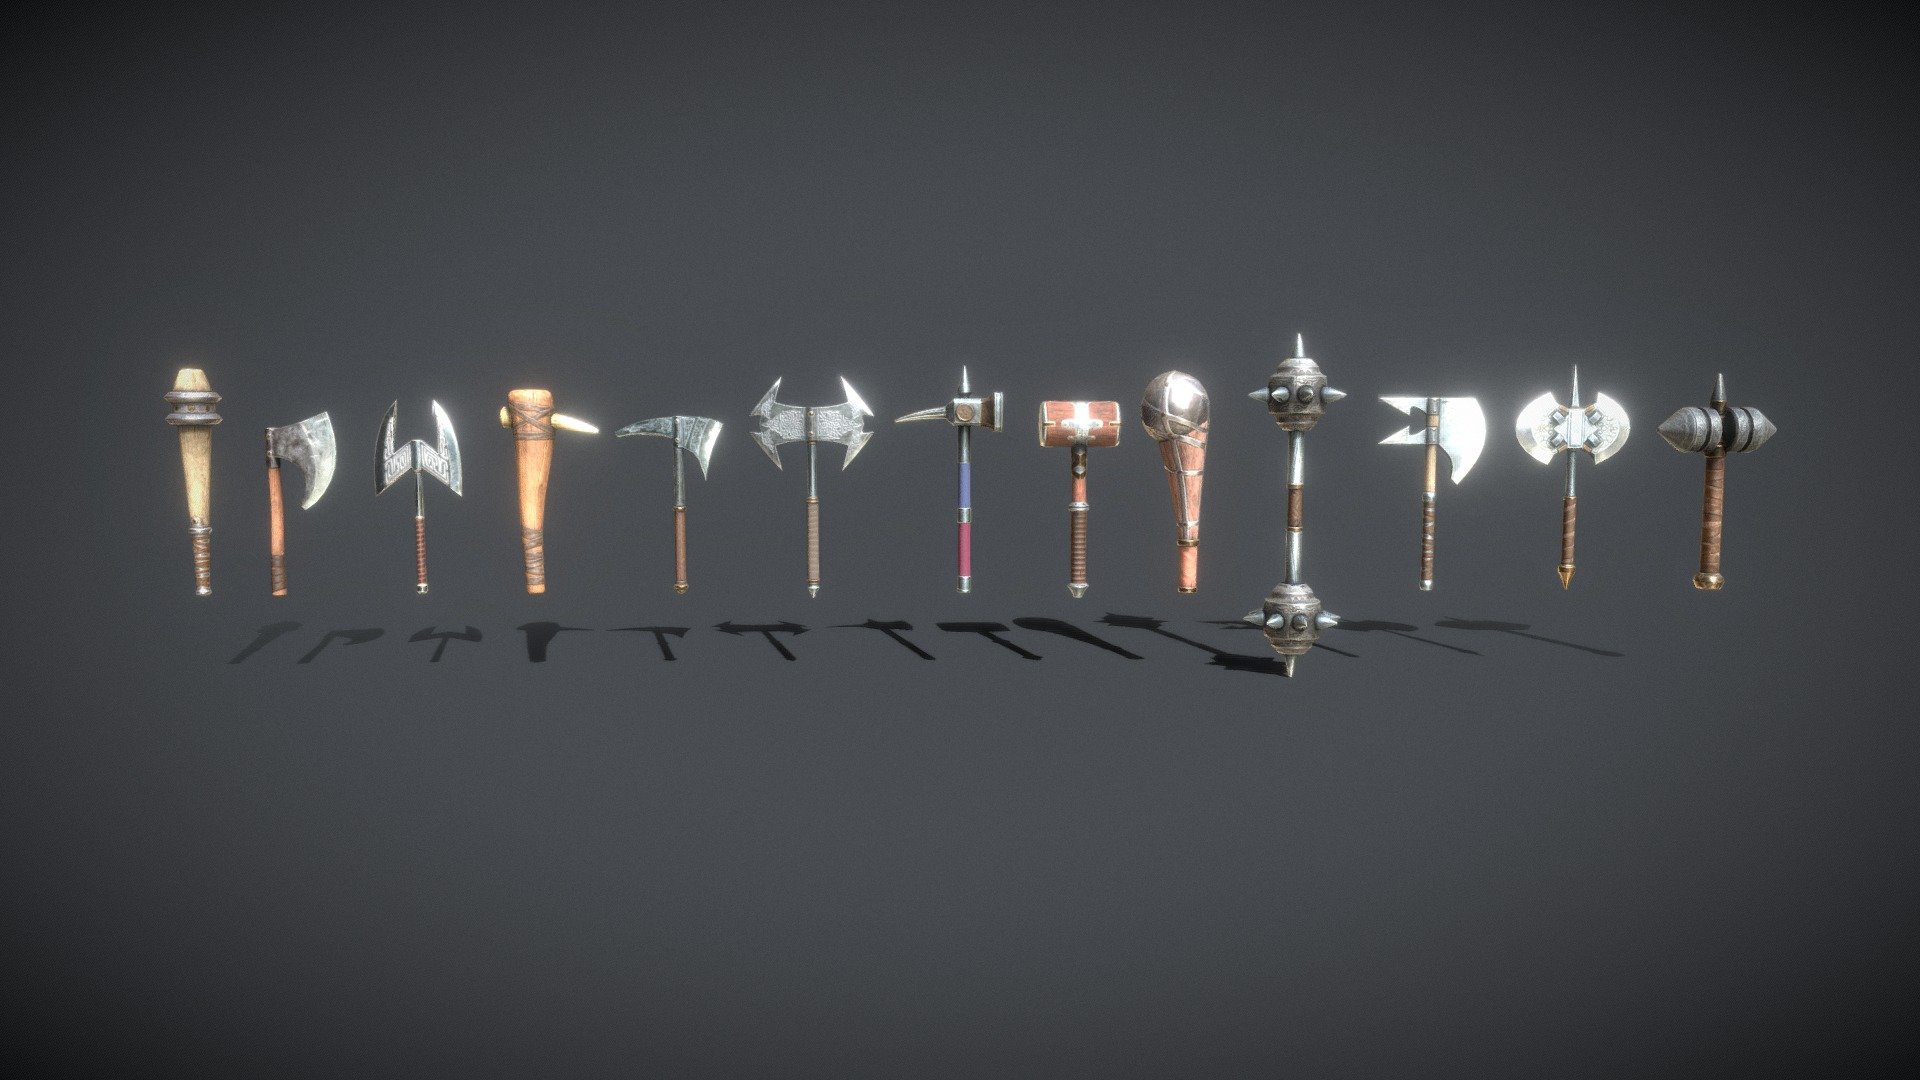 One-handed axes, hammers and clubs in excellent quality!

the set contains 13 objects.

Each object has PBR textures with a resolution of 2048x2048

The total number of triangles is 12246

SM_Axe - 540 tris

SM_Biting axe - 796 tris

SM_Club - 744 tris

SM_Combat axe - 1416 tris

SM_Doom hammer - 1128 tris

SM_Double mace - 2080 tris

SM_Great hammer - 748 tris

SM_Heavy club - 536 tris

SM_Killer axe - 732 tris

SM_Sharp axe - 804 tris

SM_Spiked club - 460 tris

SM_War axe - 1248 tris

SM_War hammer - 978 tris

Archives with textures contain:

PNG textures - base color, metallic, normal, roughness

Texturing Unity (Metallic Smoothness) - AlbedoTransparency, MetallicSmoothness, Normal

Texturing Unreal Engine - BaseColor, Normal, OcclusionRoughnessMetallic - Dwarf set - 3D model by zilbeerman 3d model